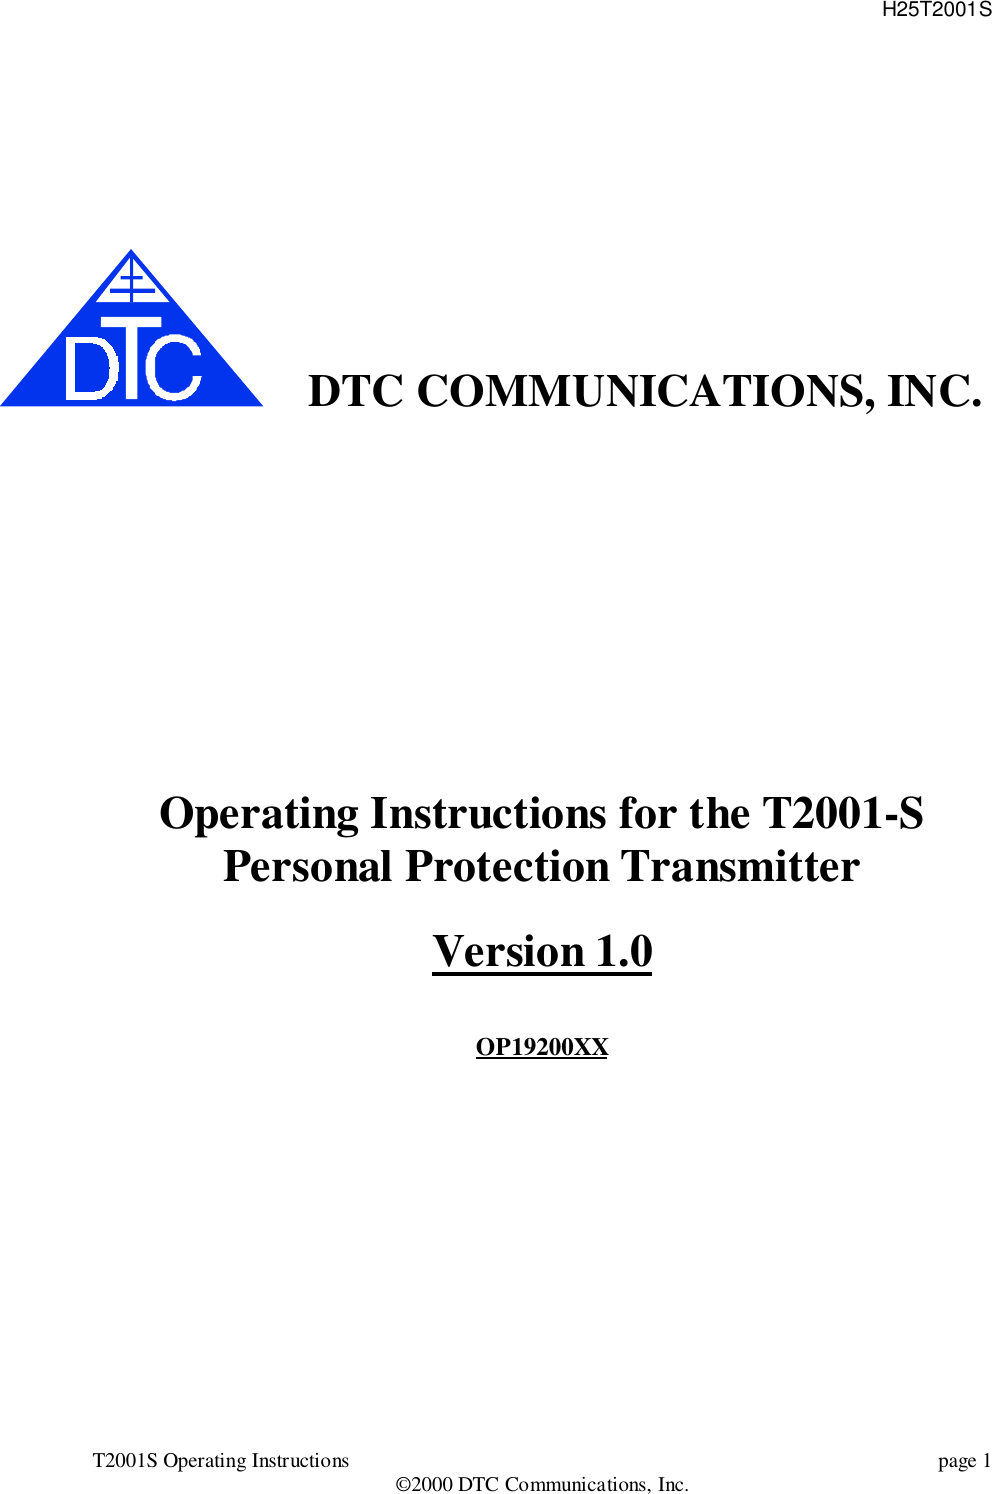 H25T2001ST2001S Operating Instructions page 1©2000 DTC Communications, Inc.DTC COMMUNICATIONS, INC.Operating Instructions for the T2001-SPersonal Protection TransmitterVersion 1.0OP19200XX